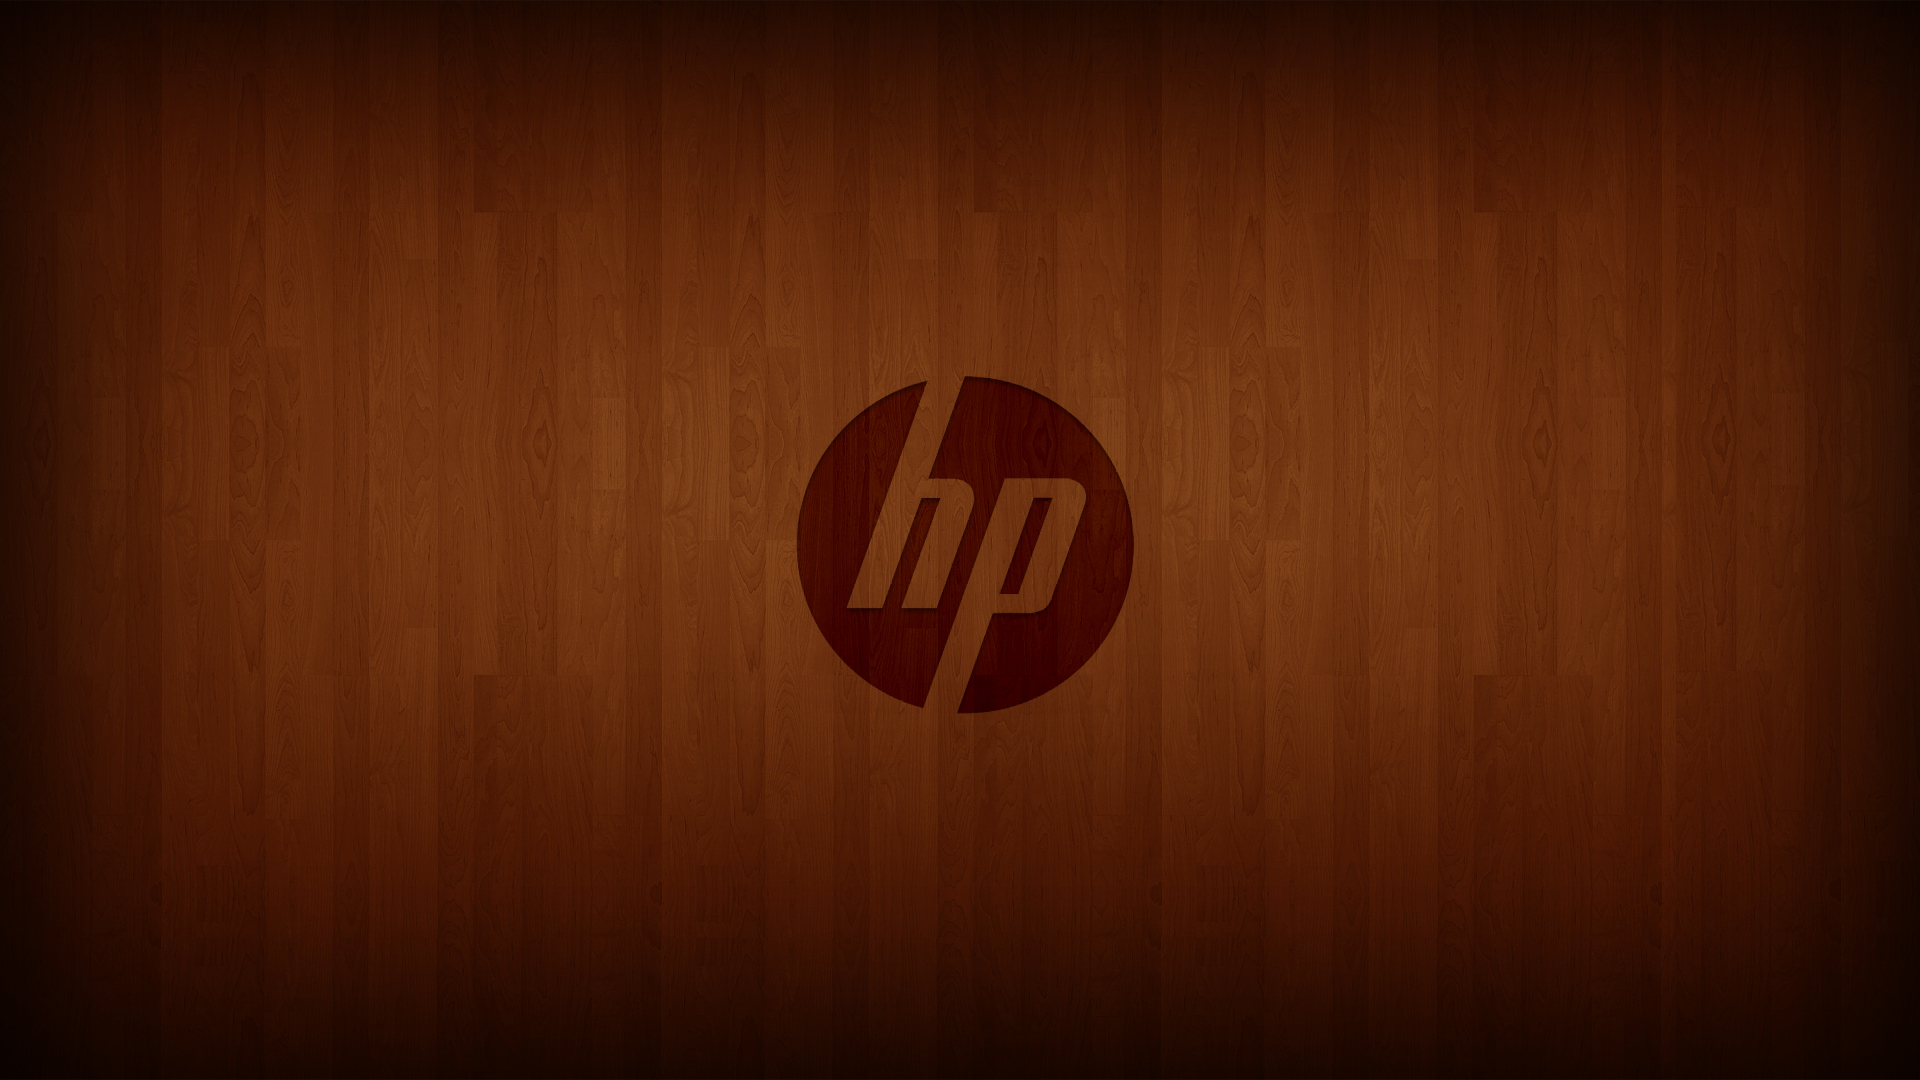 Hp Wallpaper Top Collections Of Pictures Image